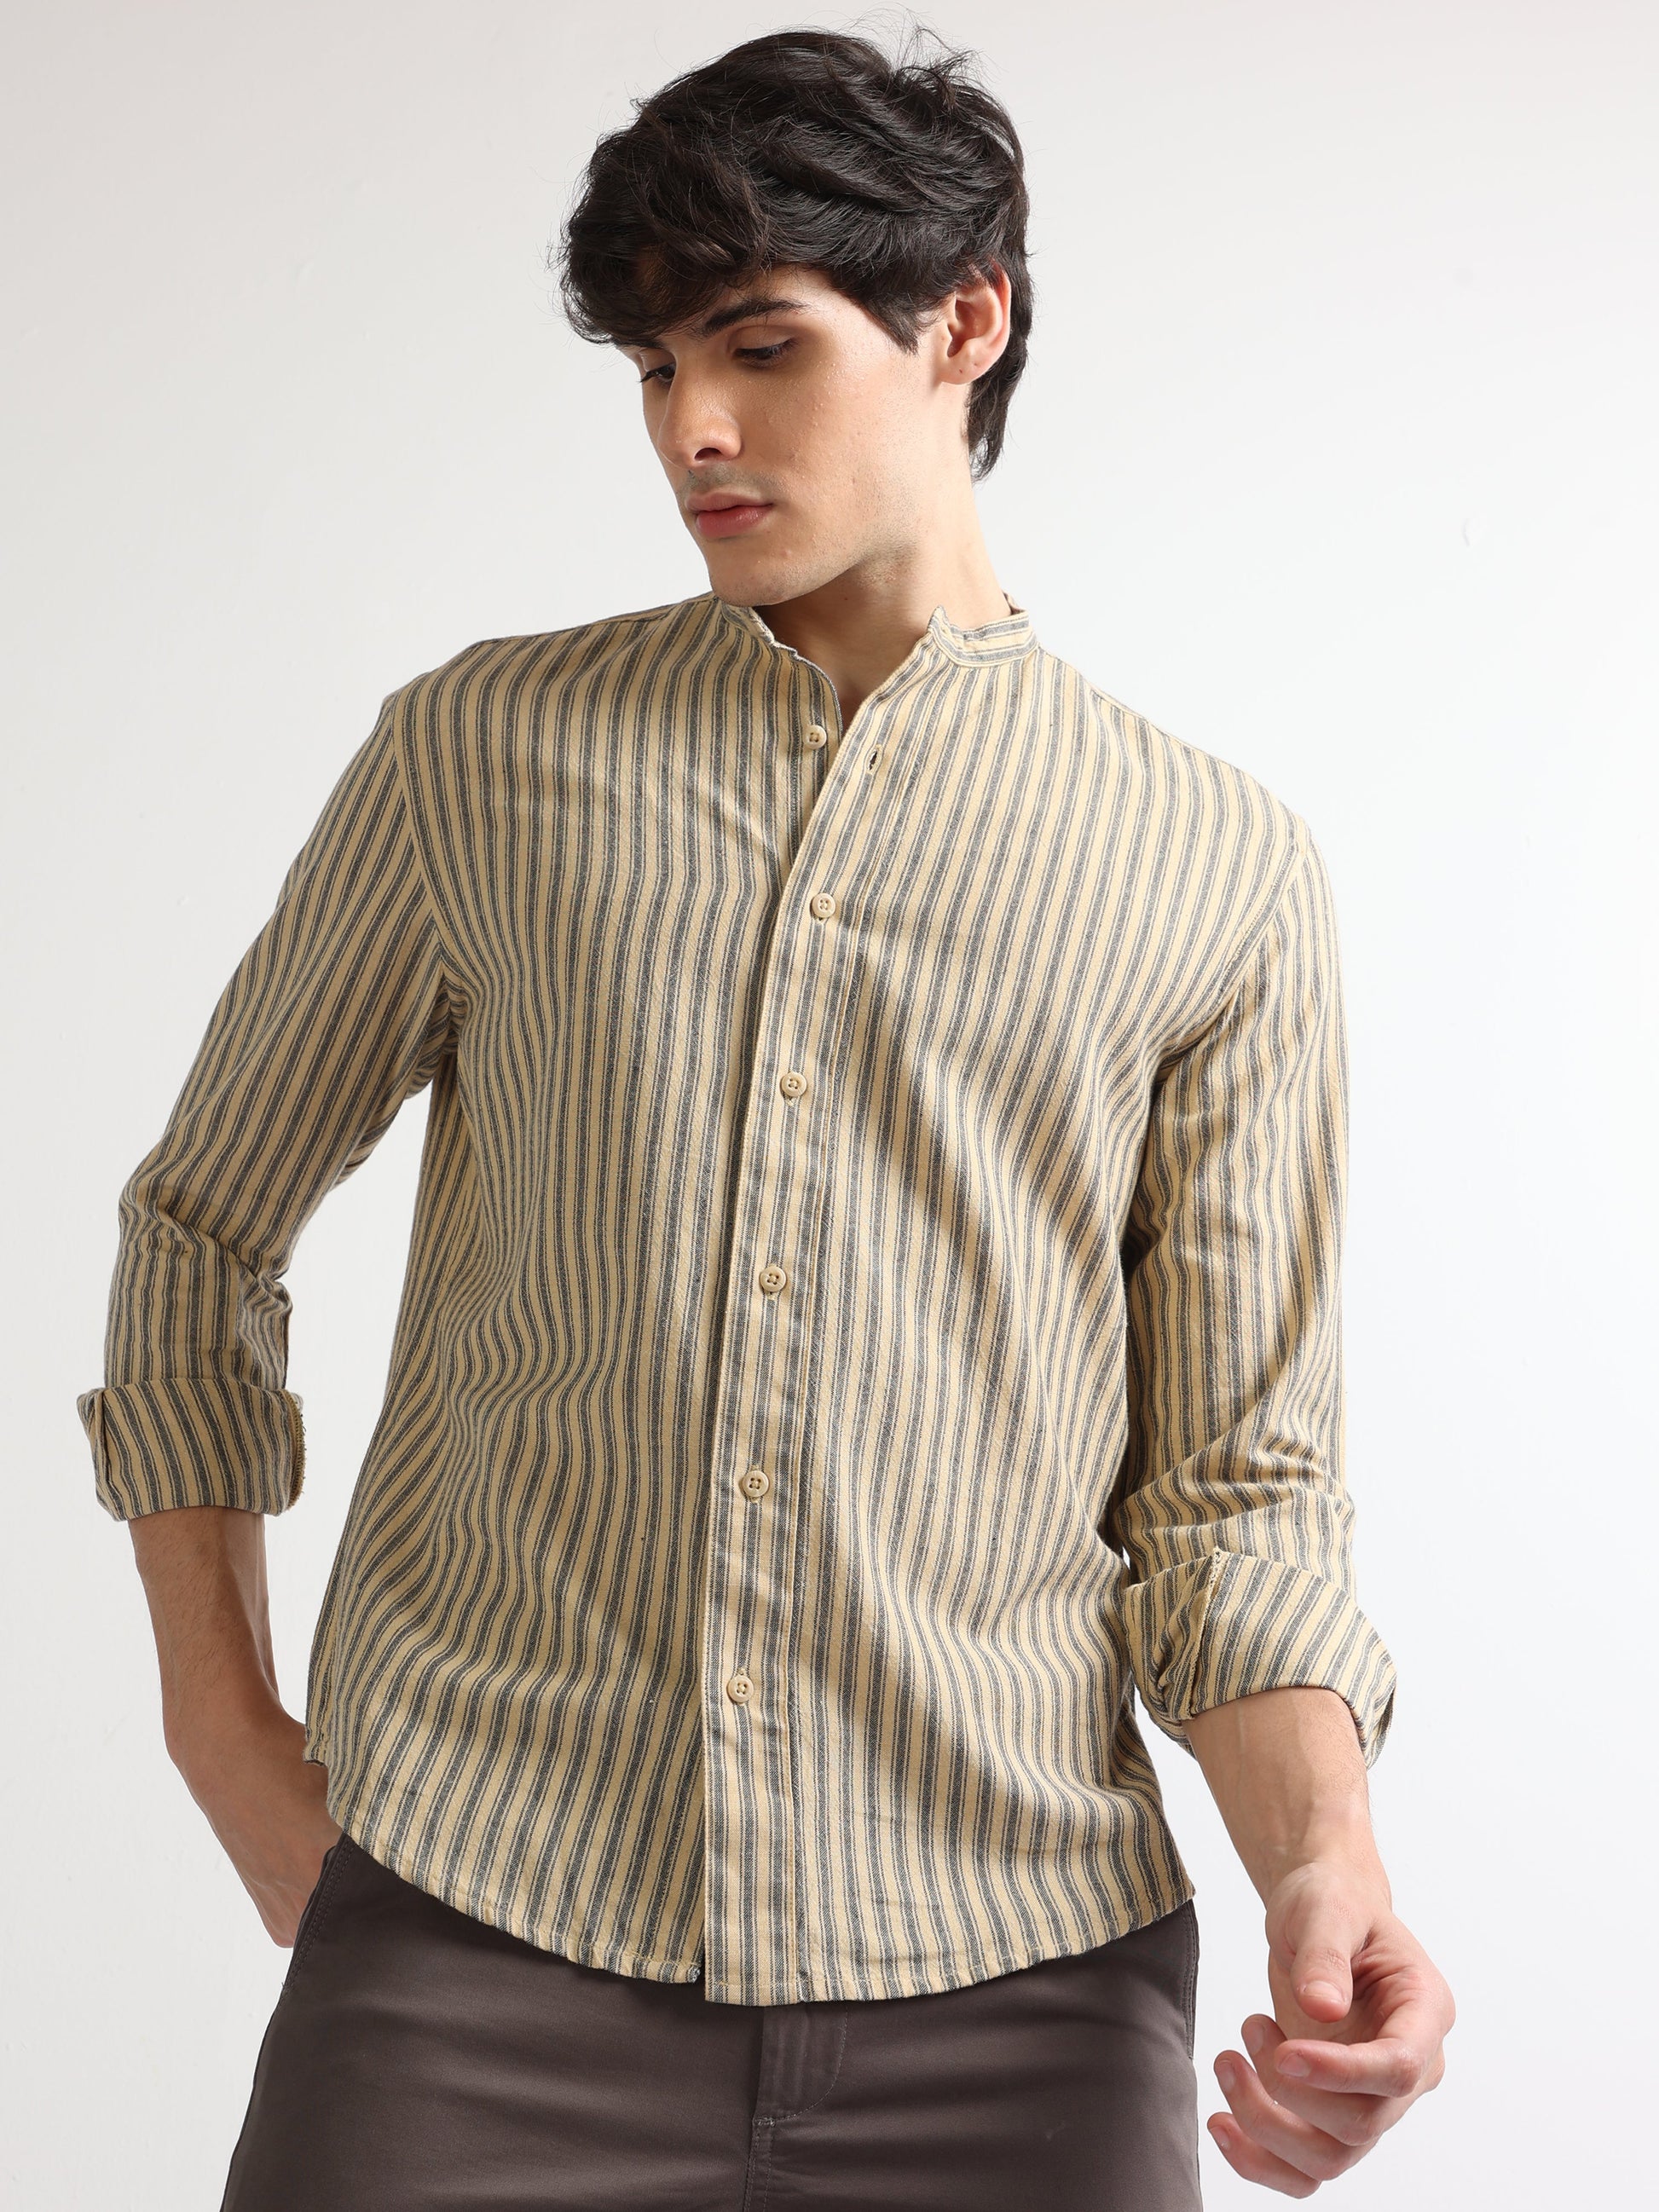 Buy Chinese Collar Full Sleeve Striped Shirt Online.